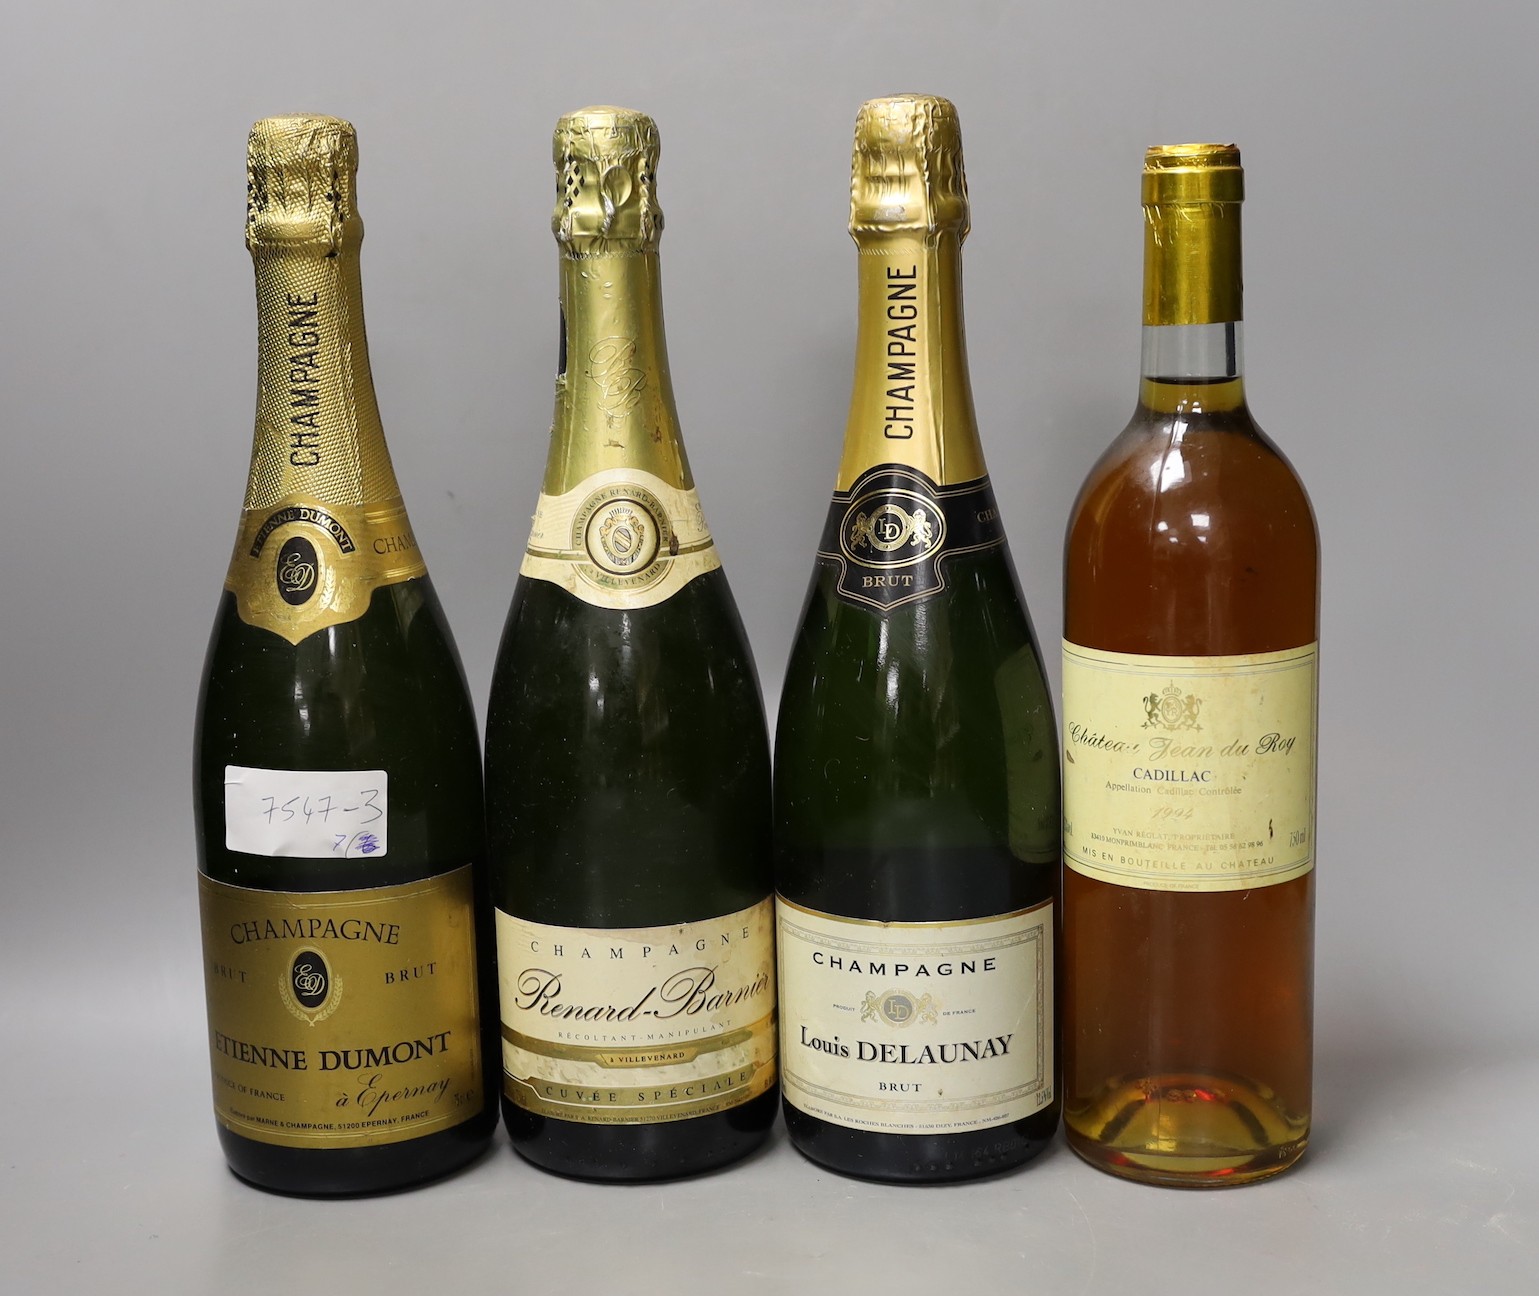 Two bottles of Etienne Dumont NV Champagne, two bottle of Louis Delauney NV Champagne, one bottle of Pol Roger NV Champagne, one bottle of Renard Barnier and a bottle of Chateau Jean Du Roy Cadillac , 1994. (7)